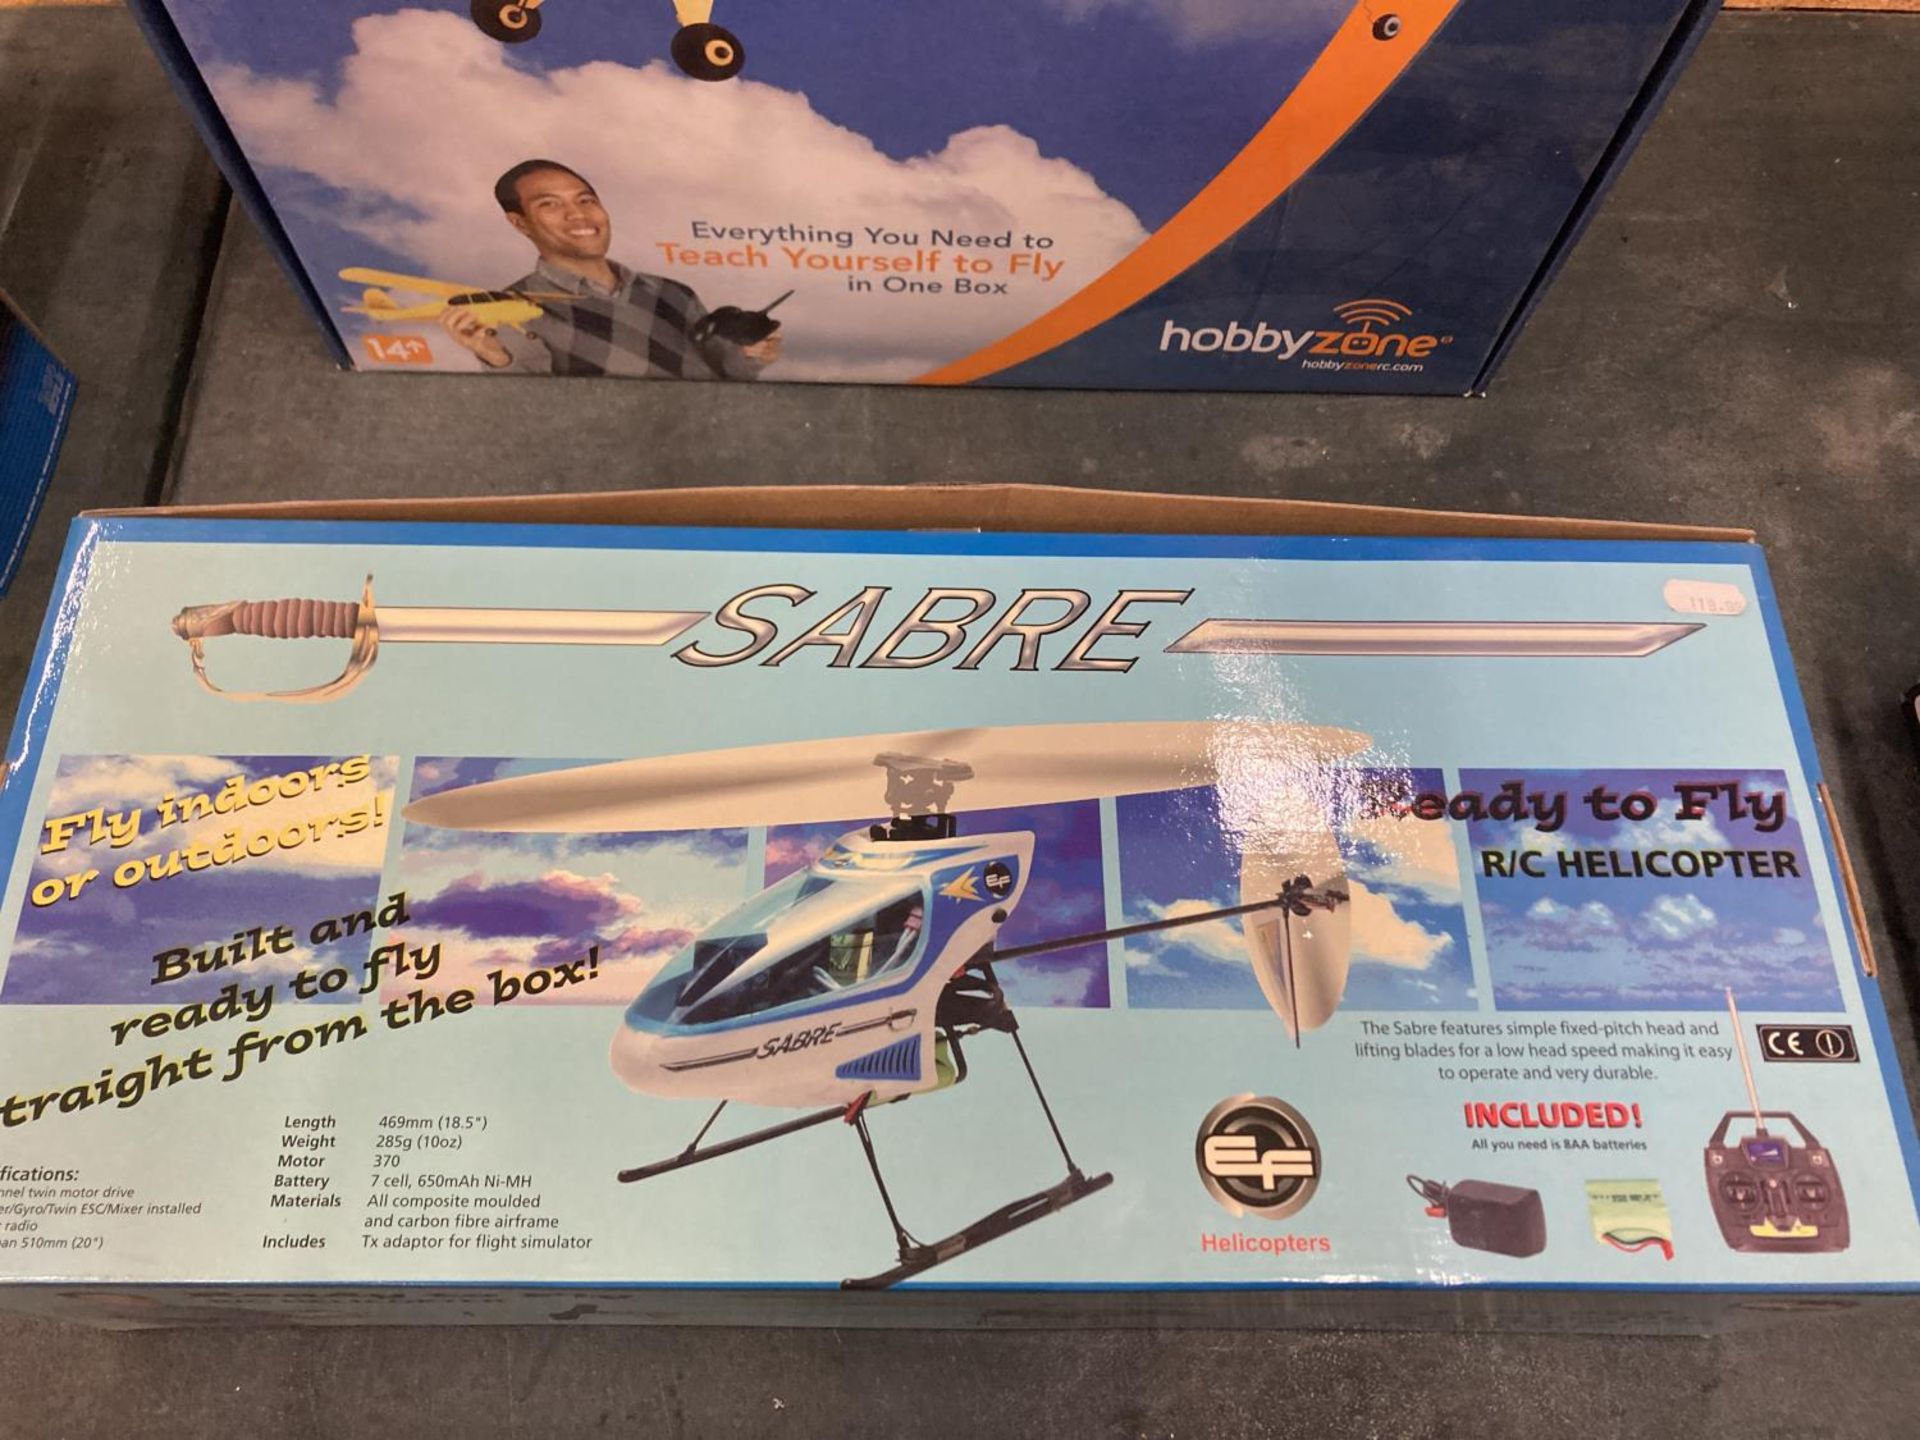 A BOXED SABRE READY TO FLY R/C HELICOPTER AND A HOBBYZONE R/C AREOPLANE, BOTH CONTROLLERS PRESENT - Image 2 of 7